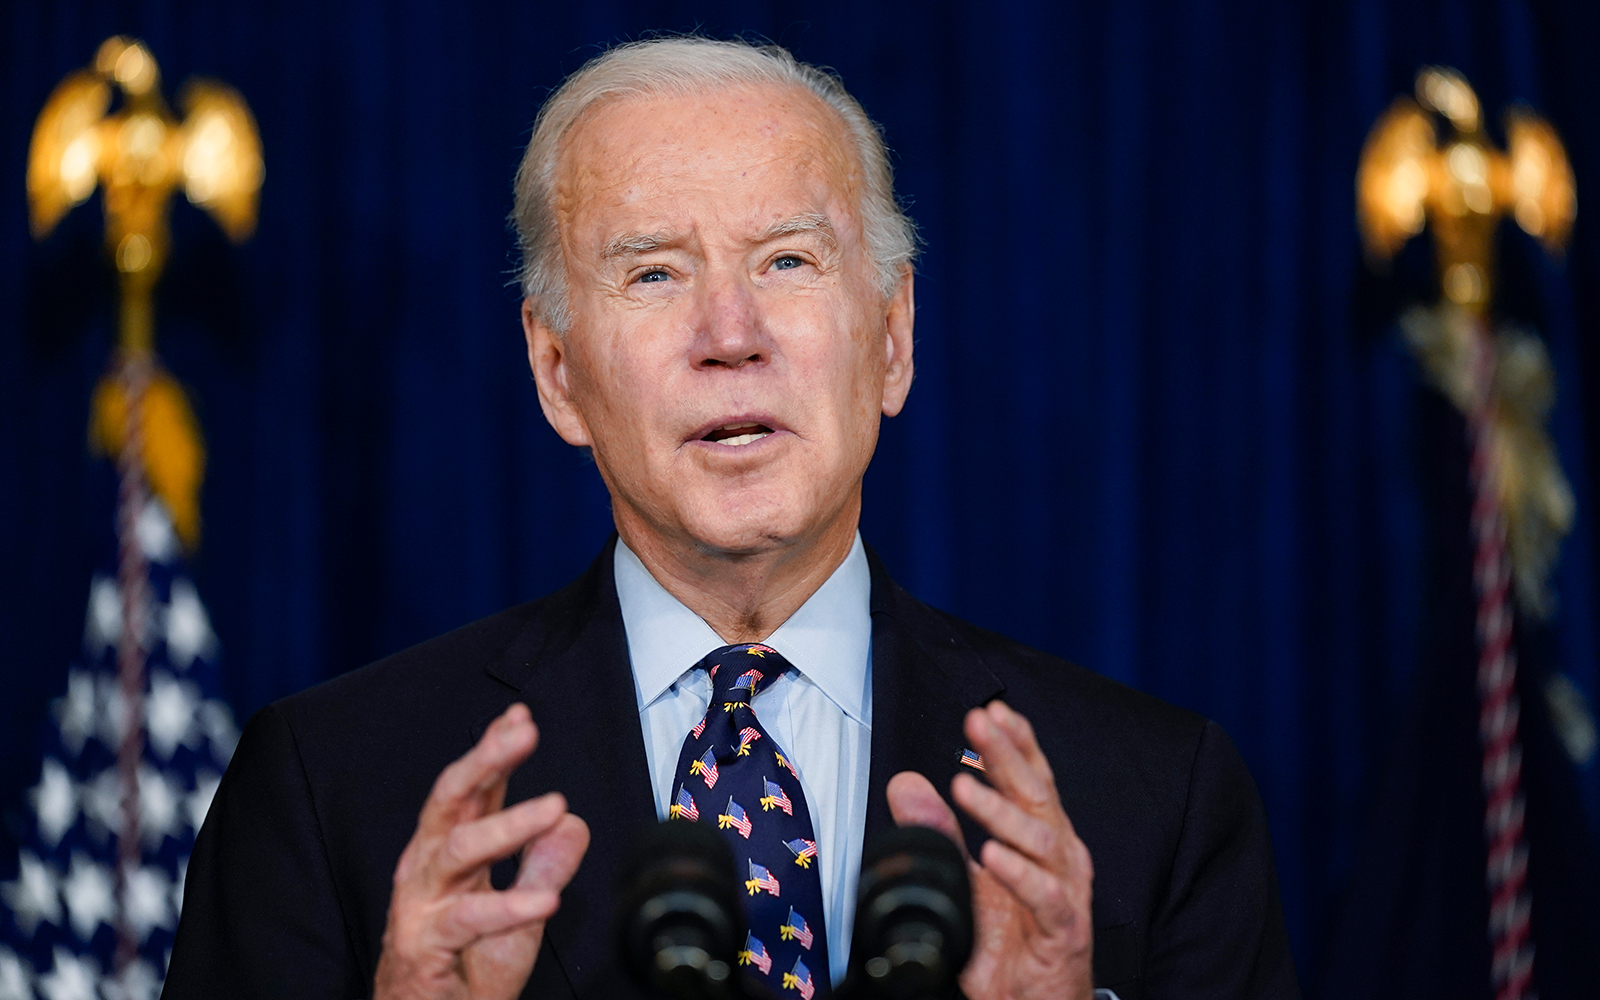 President Joe Biden speaks about the severe weather that impacted at least five states and left widespread devastation at the Chase Center in Wilmington, Del., Saturday, Dec. 11. (Carolyn Kaster/AP Images)